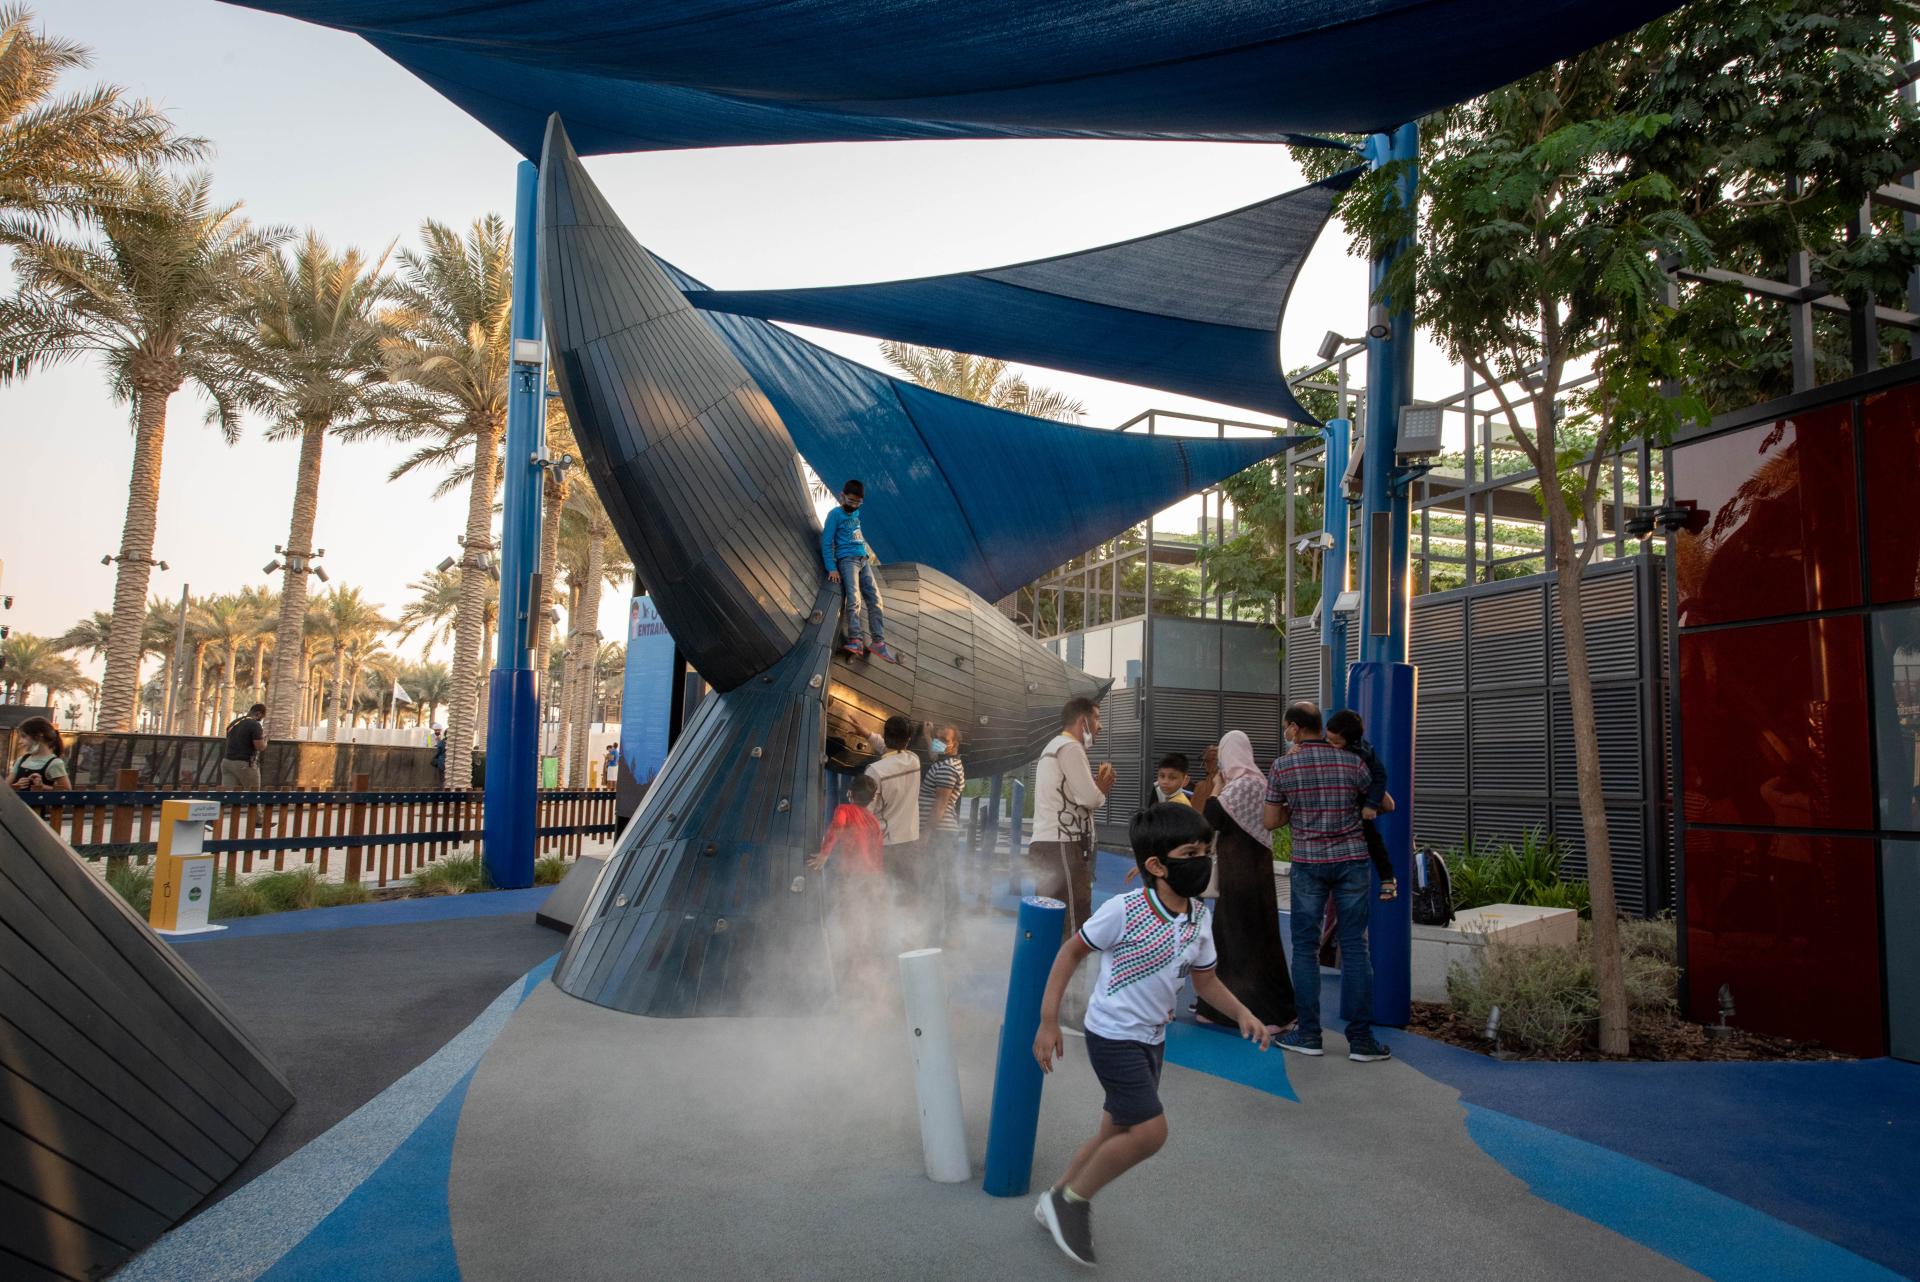 Kids playing in mist playground feature, whale playground, Expo 2020 MONSTRUM playgrounds